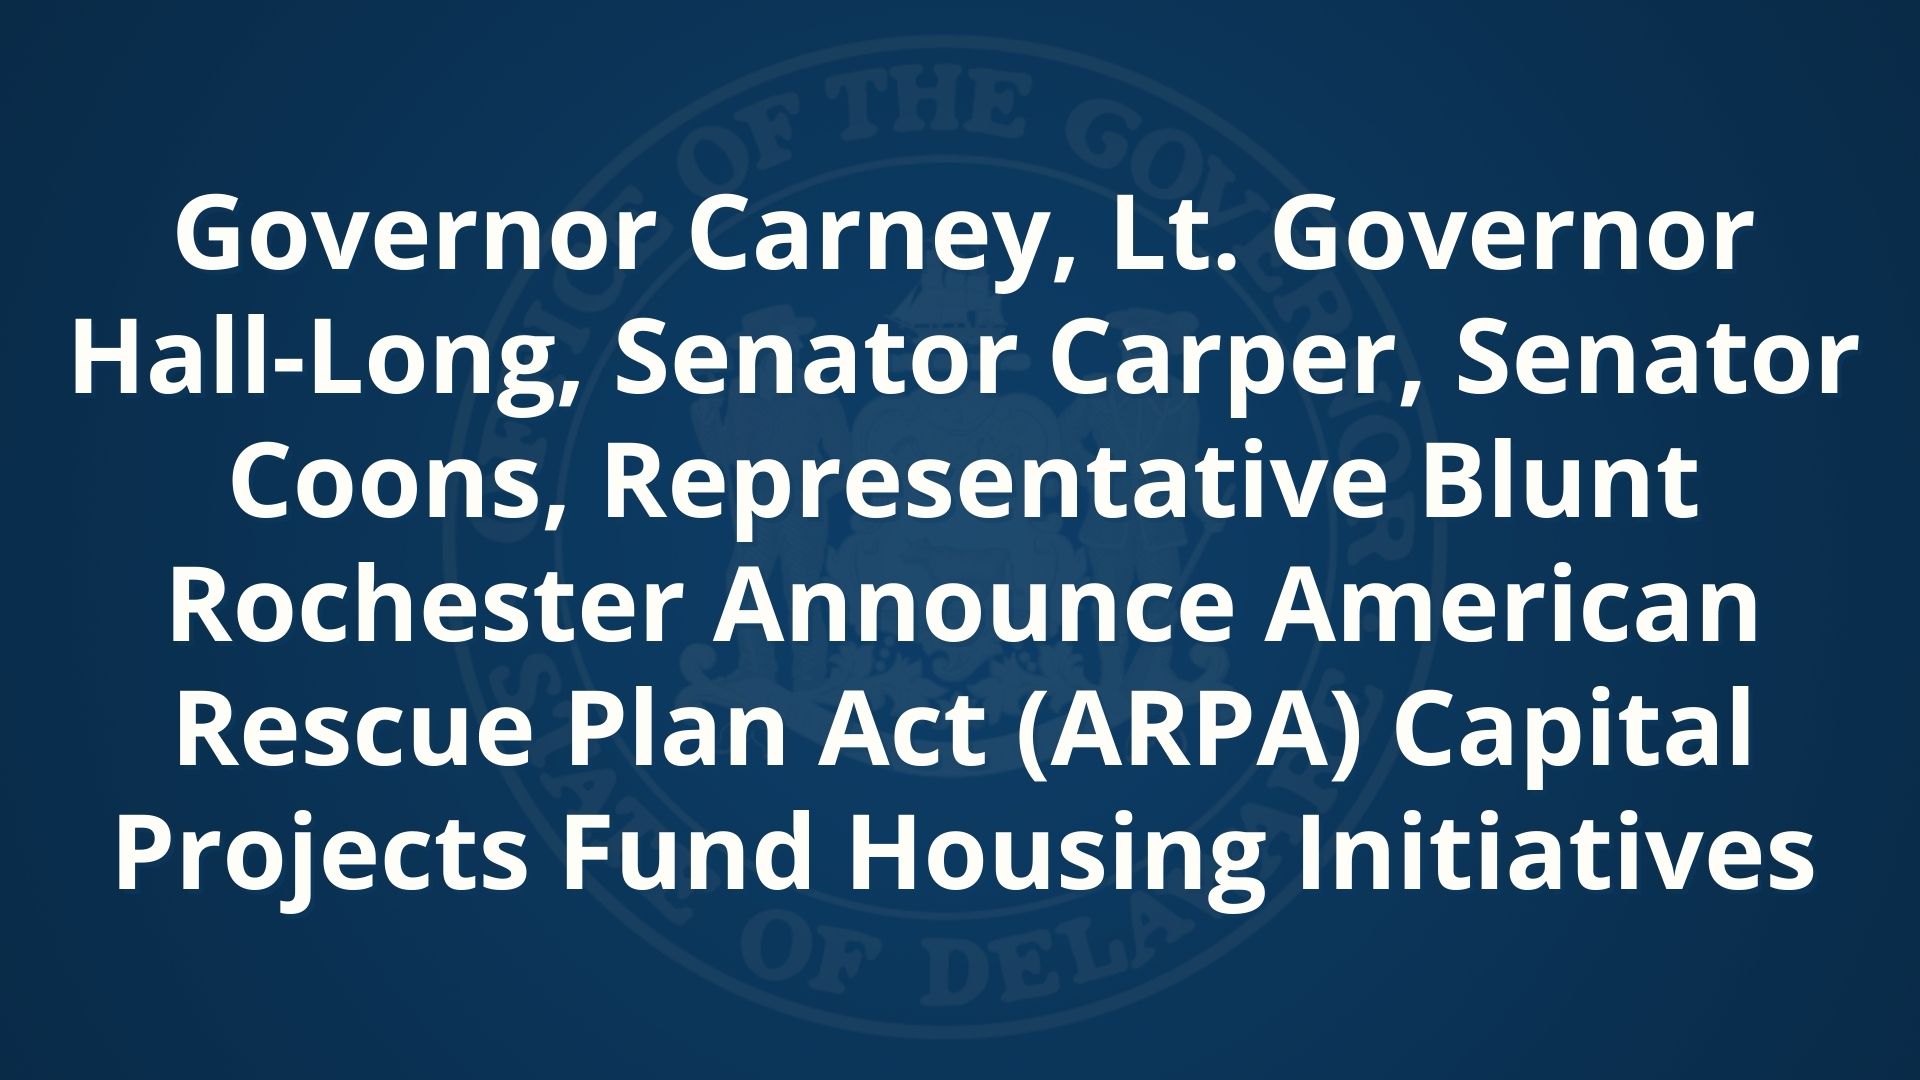 Graphic featuring the State of Delaware logo and the text "Governor Carney, Lt. Governor Hall-Long, Senator Carper, Senator Coons, Representative Blunt Rochester Announce American Rescue Plan Act (ARPA) Capital Projects Fund Housing Initiatives"